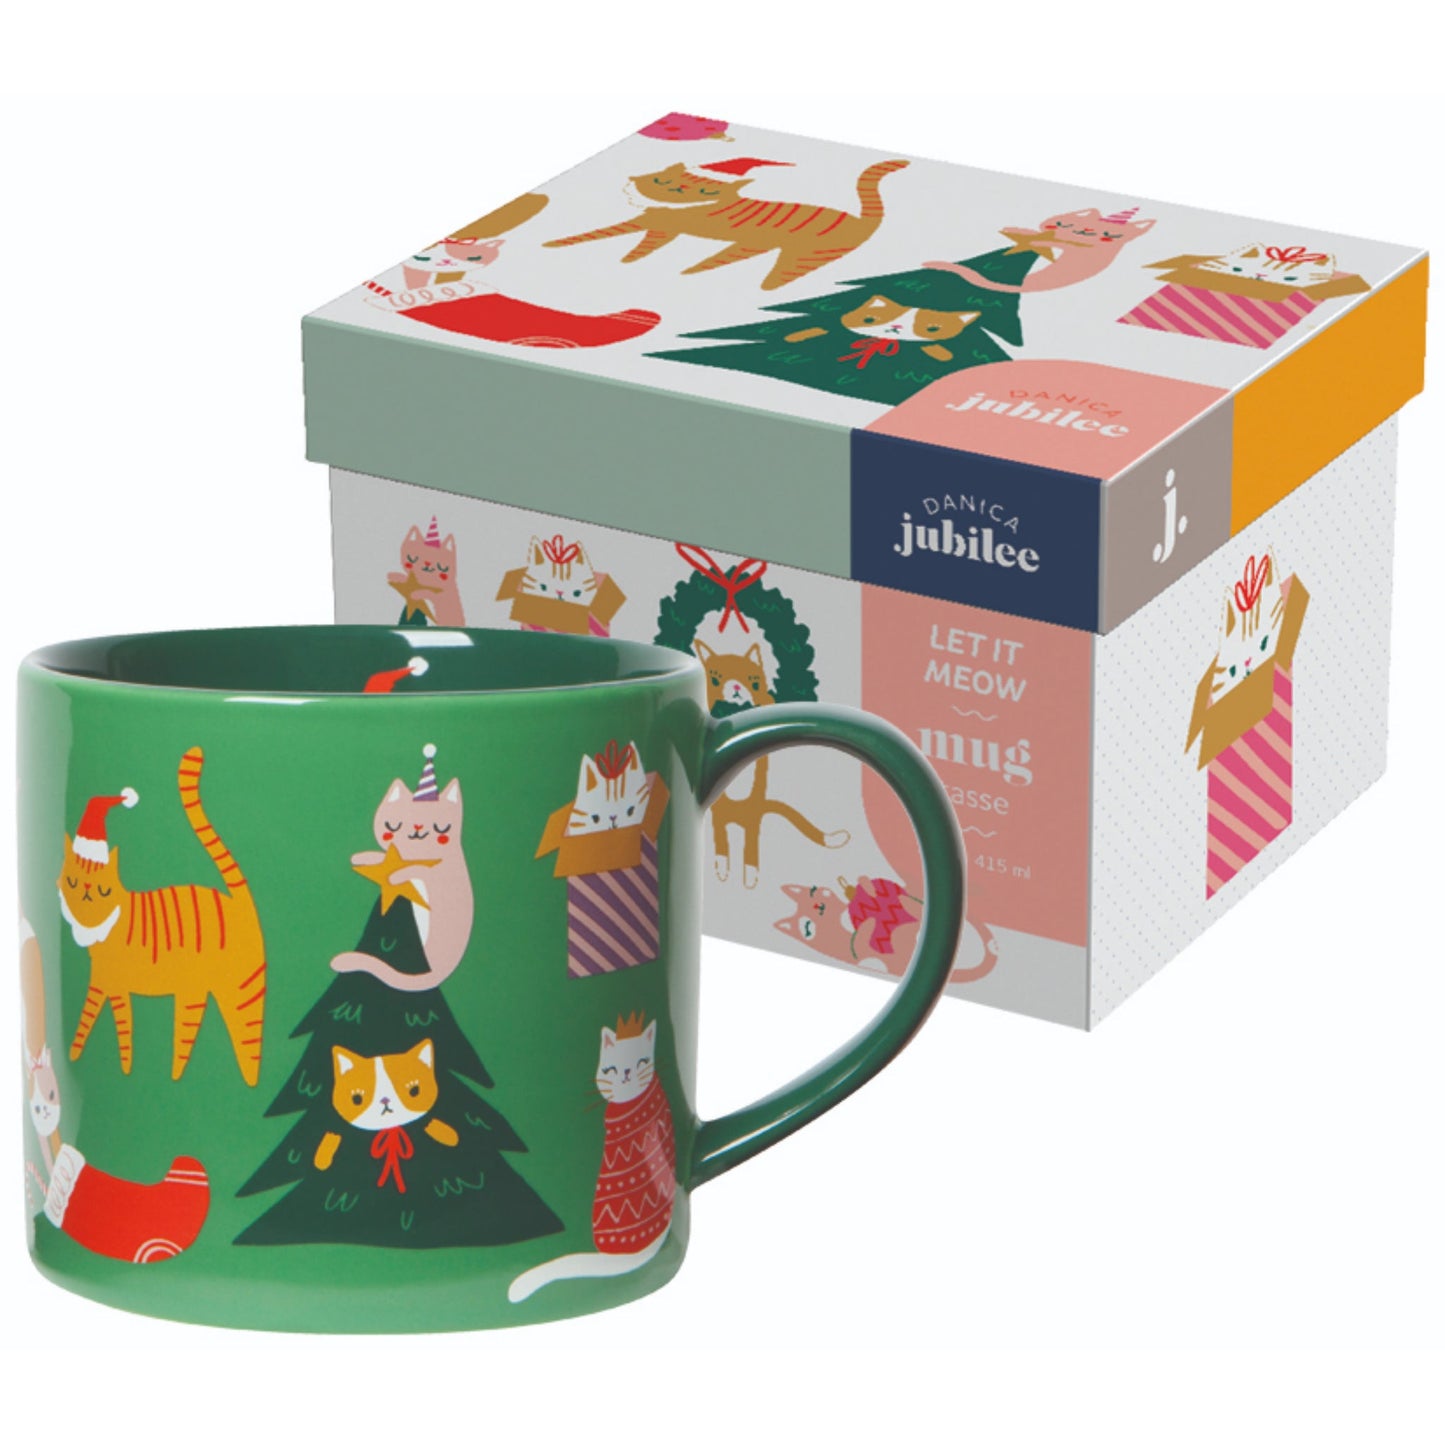 "Let It Meow": Mug in a Box - Tiny Tiger Gift Shop